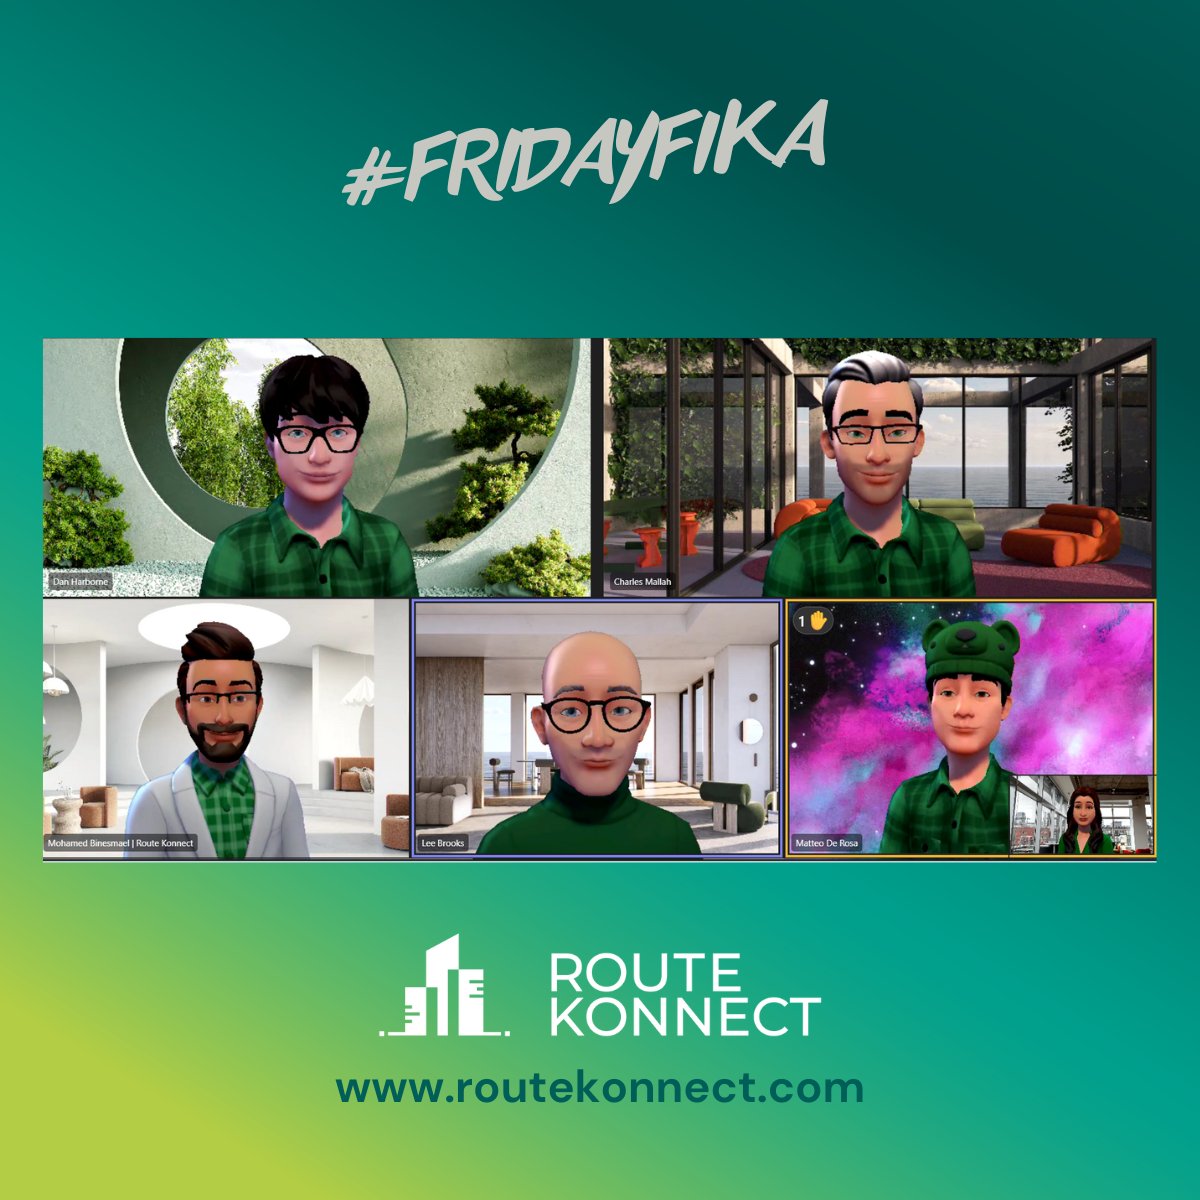 As a remote team it's important to stay connected, which is why we like to throw in a little fun on Fridays with our #Fika, a Swedish concept that means to pause. In this Fika we designed our #MicrosoftTeams avatars and discovered an option for RK green shirts! #brandedclothing